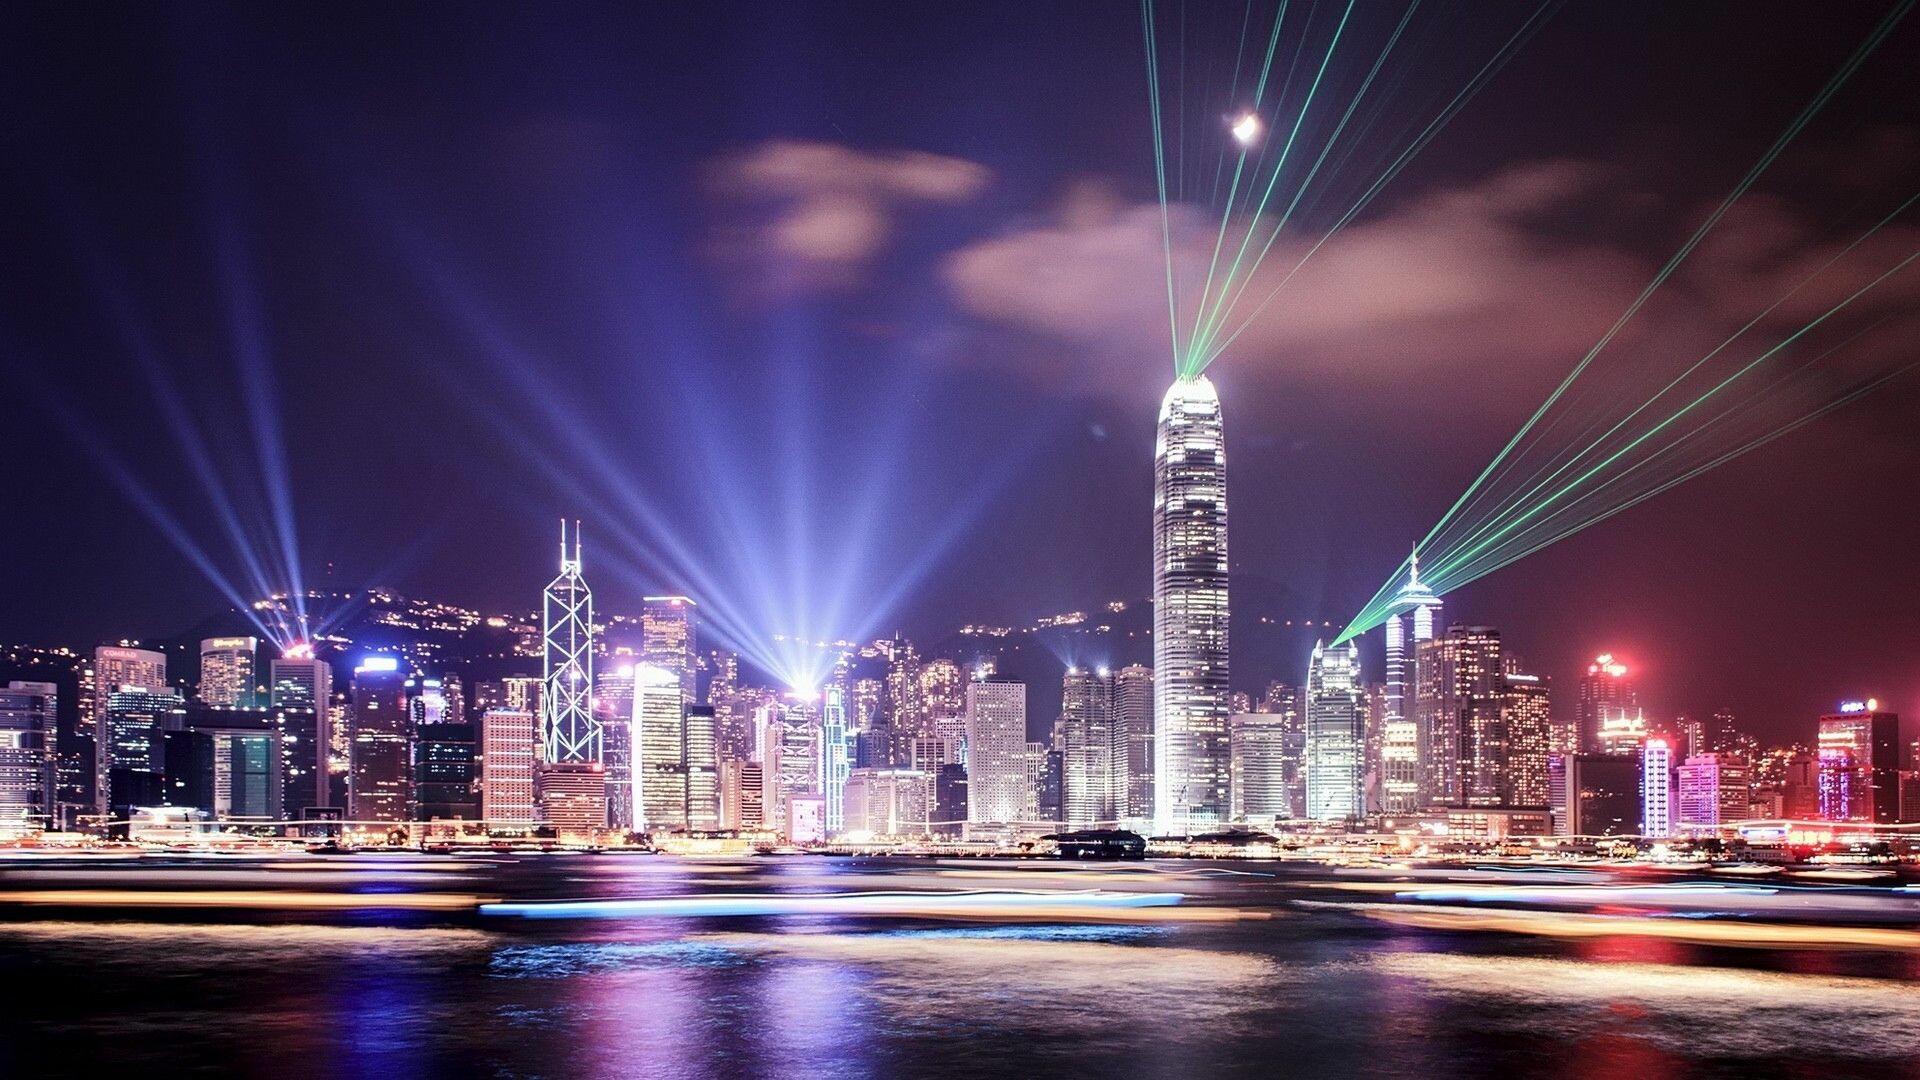 Hong Kong: A Symphony of Lights, A daily light and sound show across the Victoria Harbour. 1920x1080 Full HD Wallpaper.